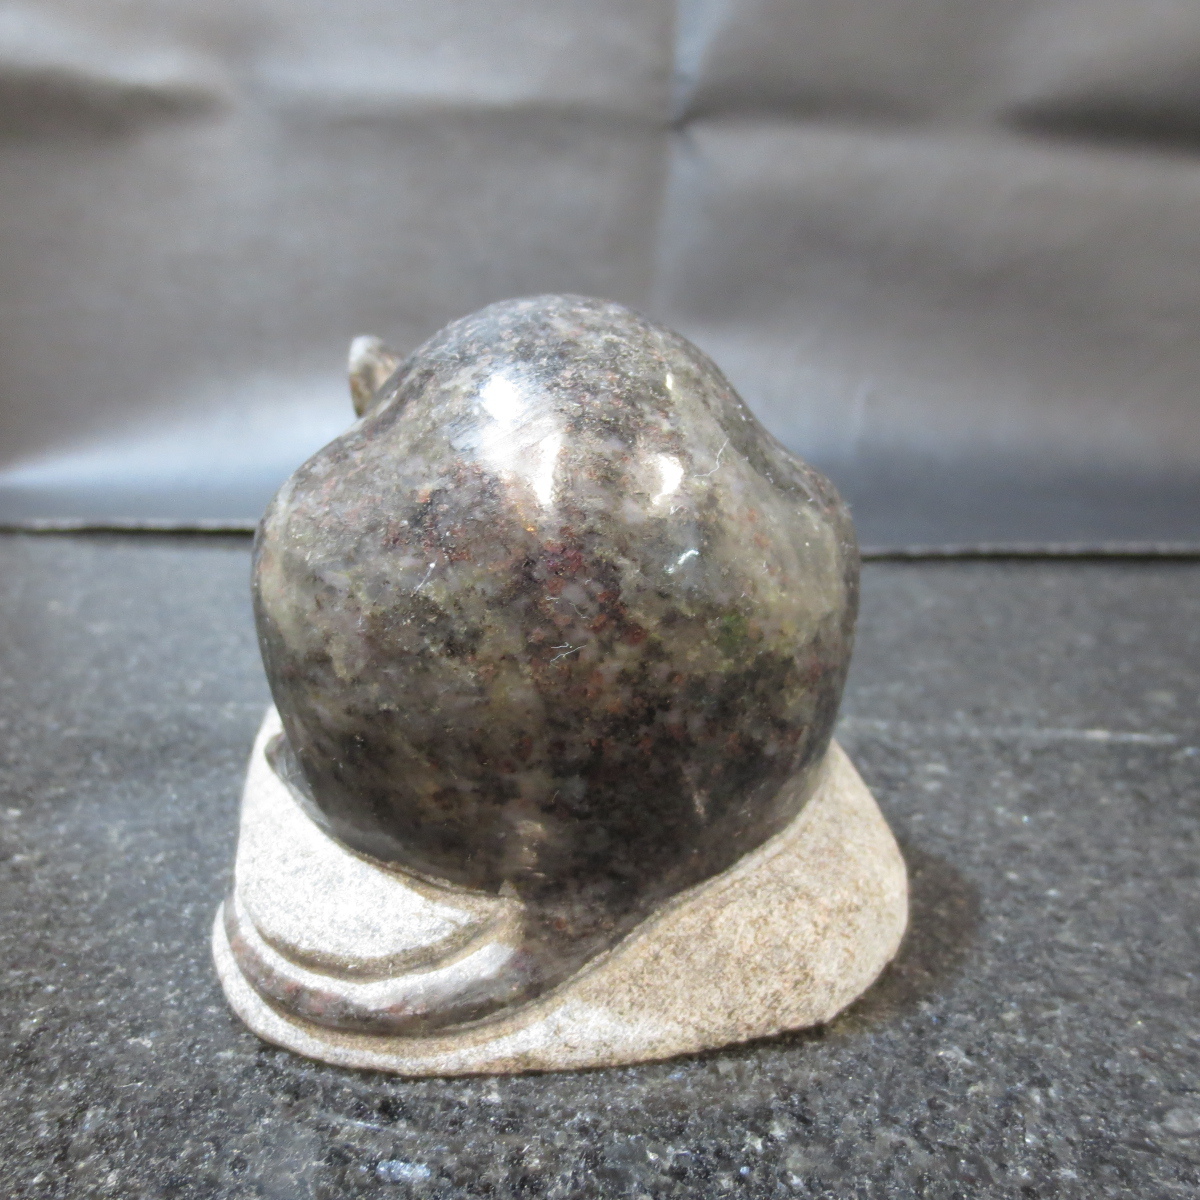  mouse mouse . main . ornament sculpture objet d'art weight . year 10 two main .. stone NZ02 712g free shipping 